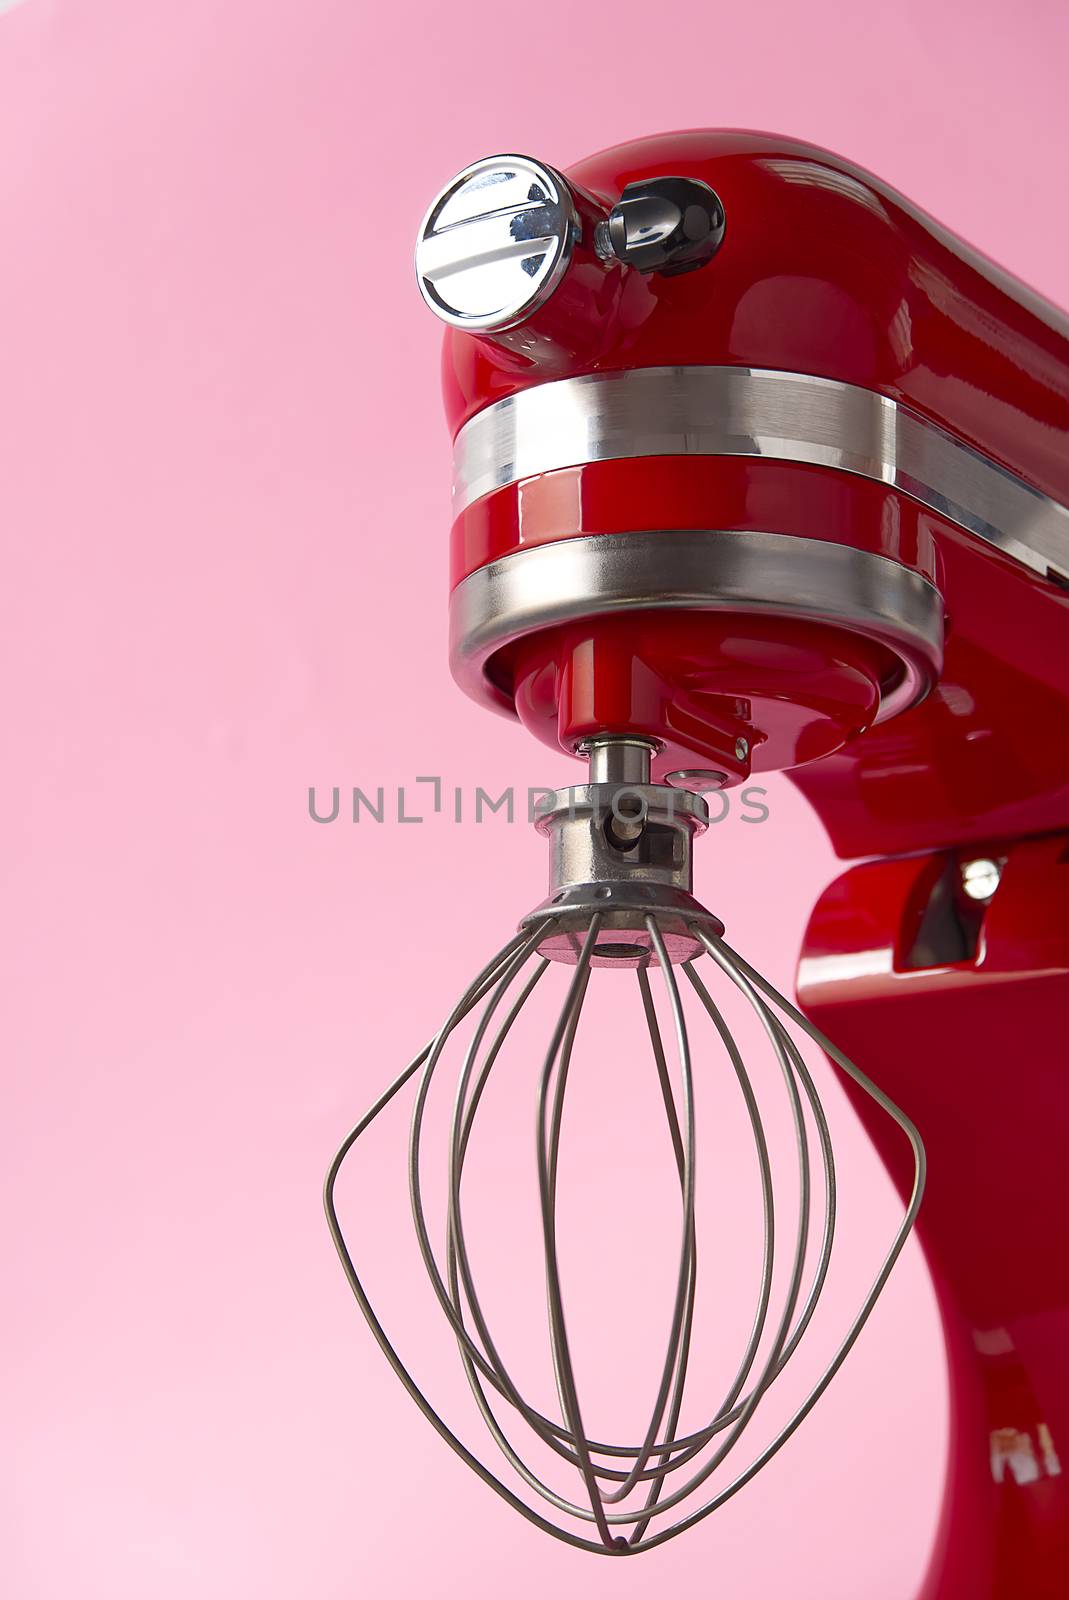 Stylish Red Kitchen Mixer With Clipping Path Isolated On pink Background. Professional steel electric mixer with Metal Whisk.